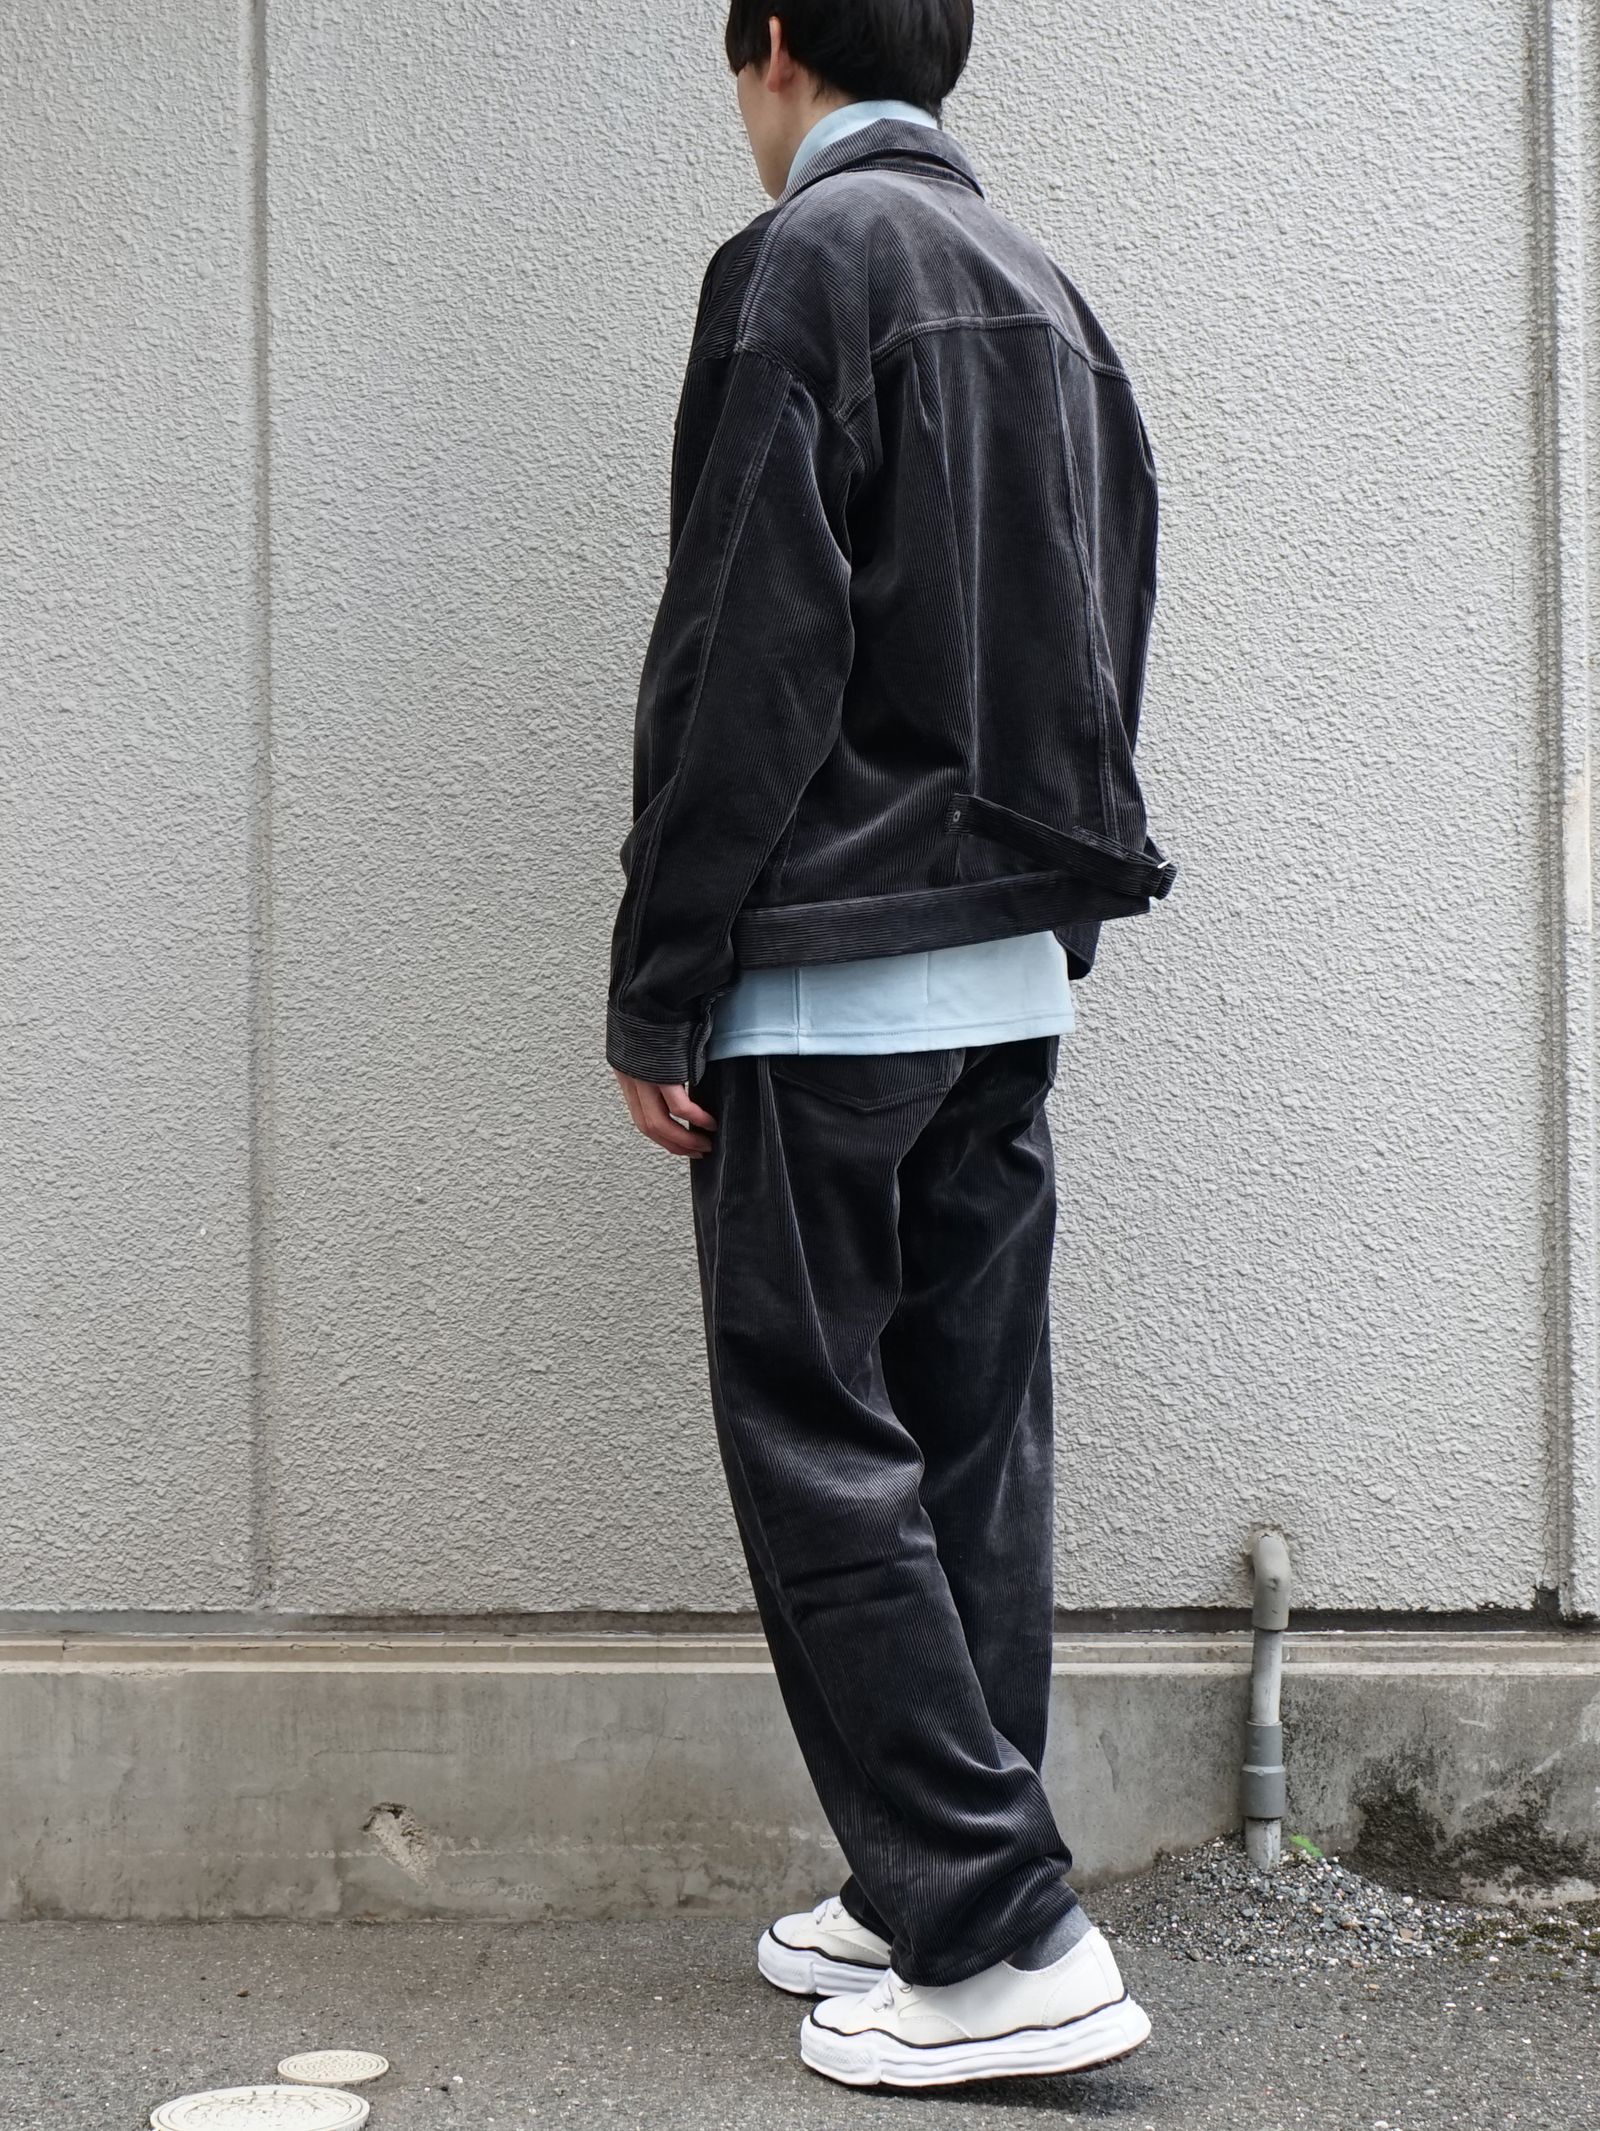 SEVEN BY SEVEN - 【23-24AW】 コーデュロイ ジャケット - 1st Type